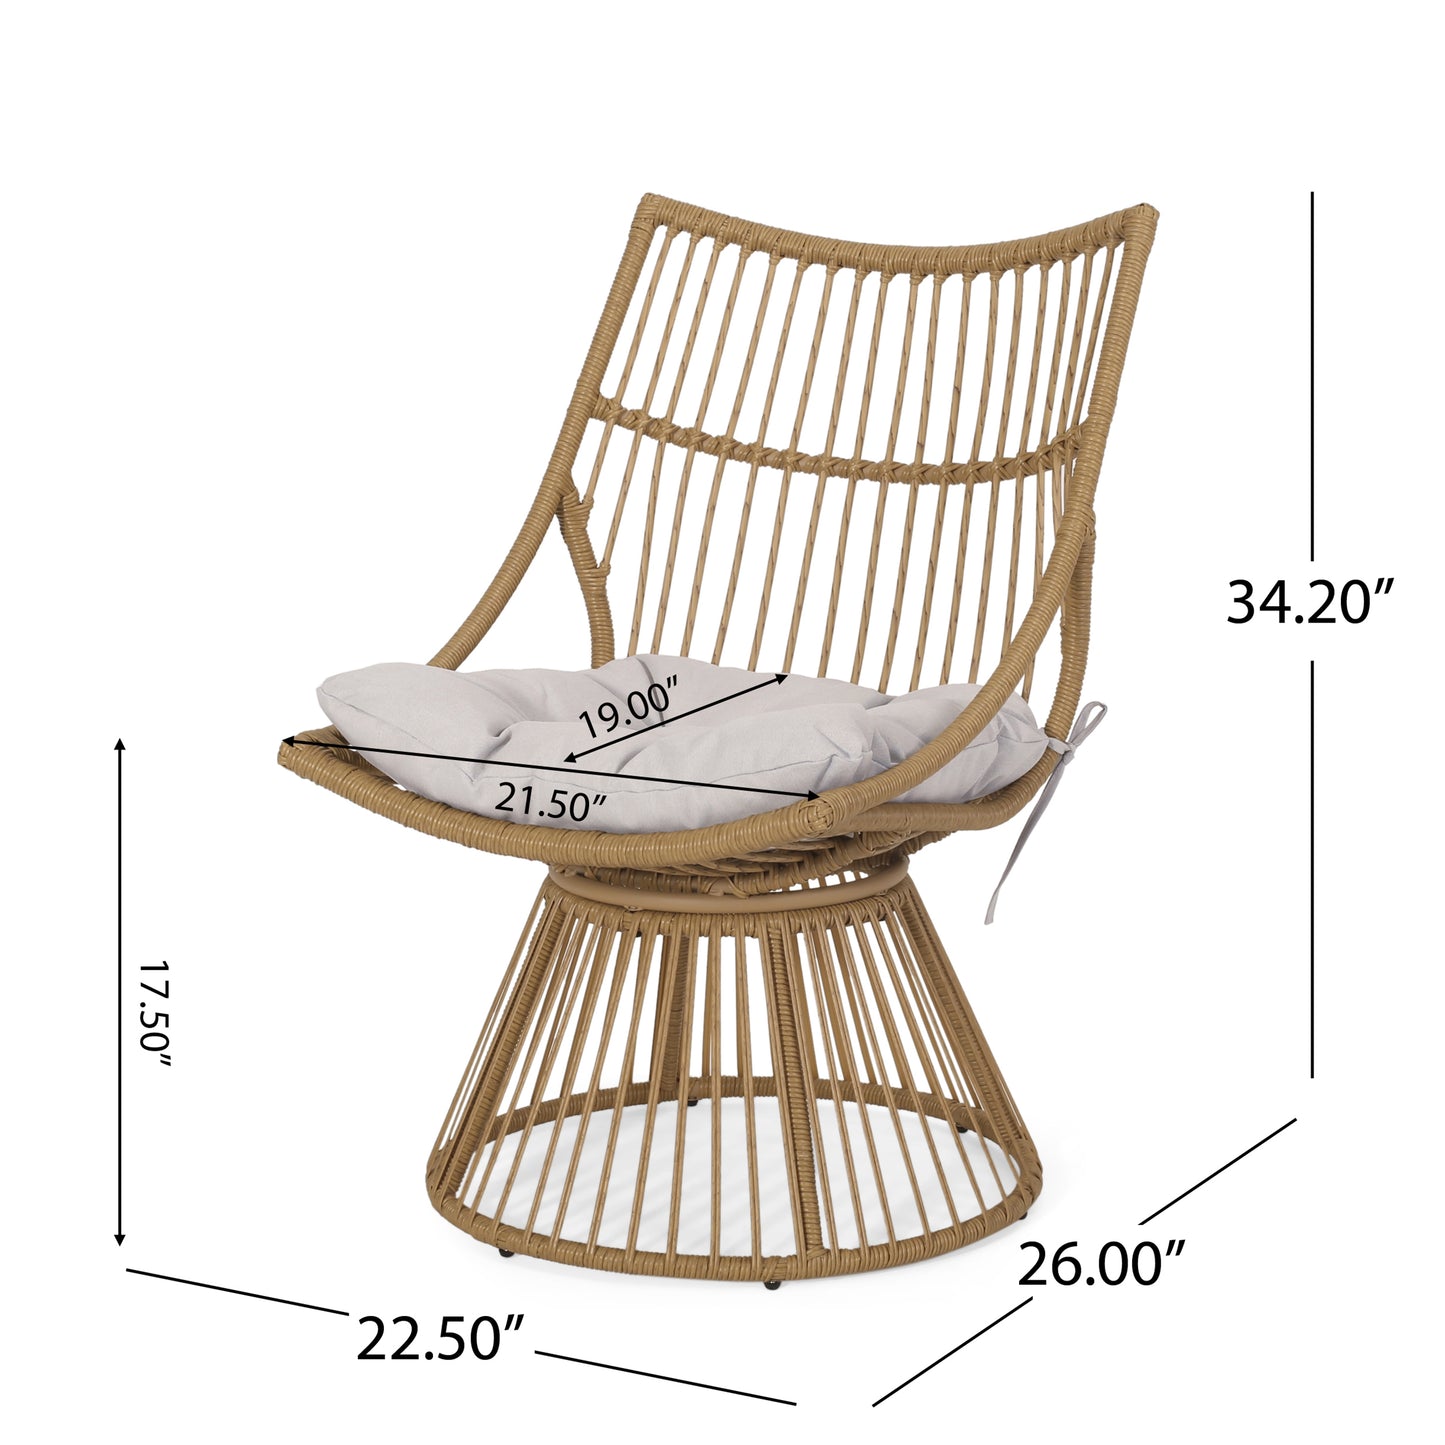 Apulia Outdoor Wicker Chair and Side Table Set with Cushion, Light Brown and Beige